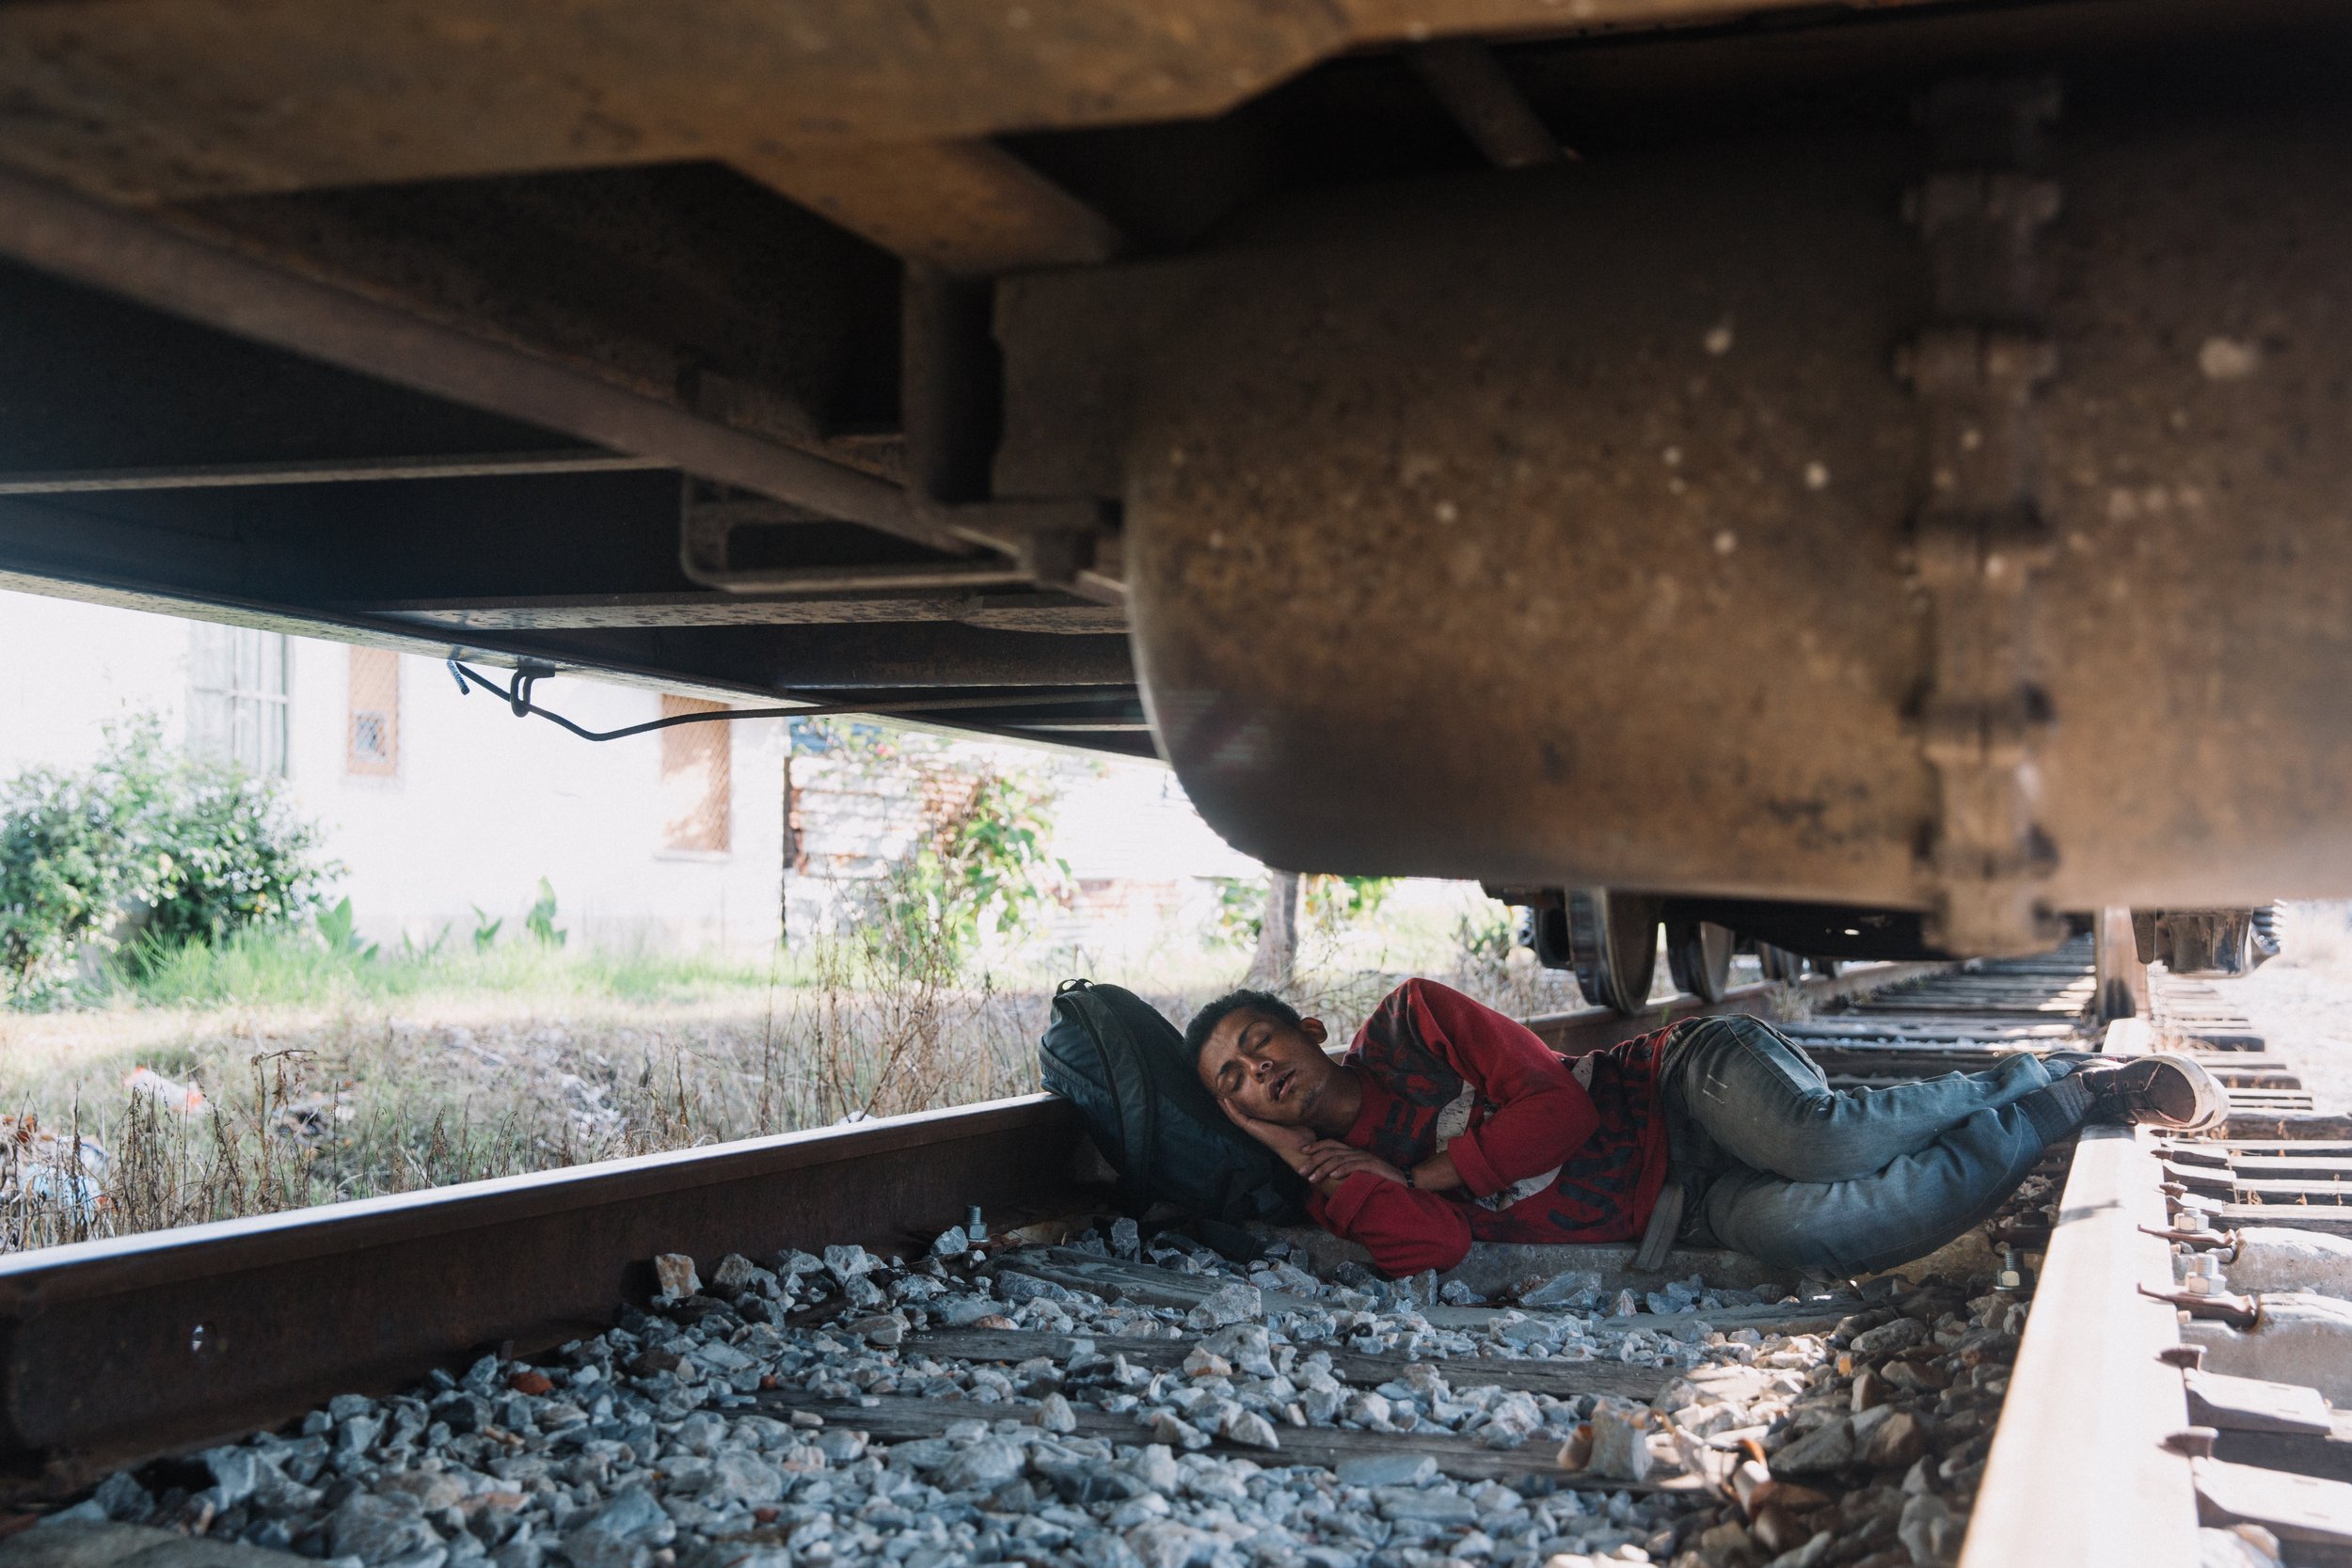  As a freight train rumbles through a neighborhood of Coatzacoalcos, Veracruz, a migrant takes advantage of a moment of stillness to catch some sleep. For many migrants, the journey through Mexico involves hopping on and off moving trains, often in d